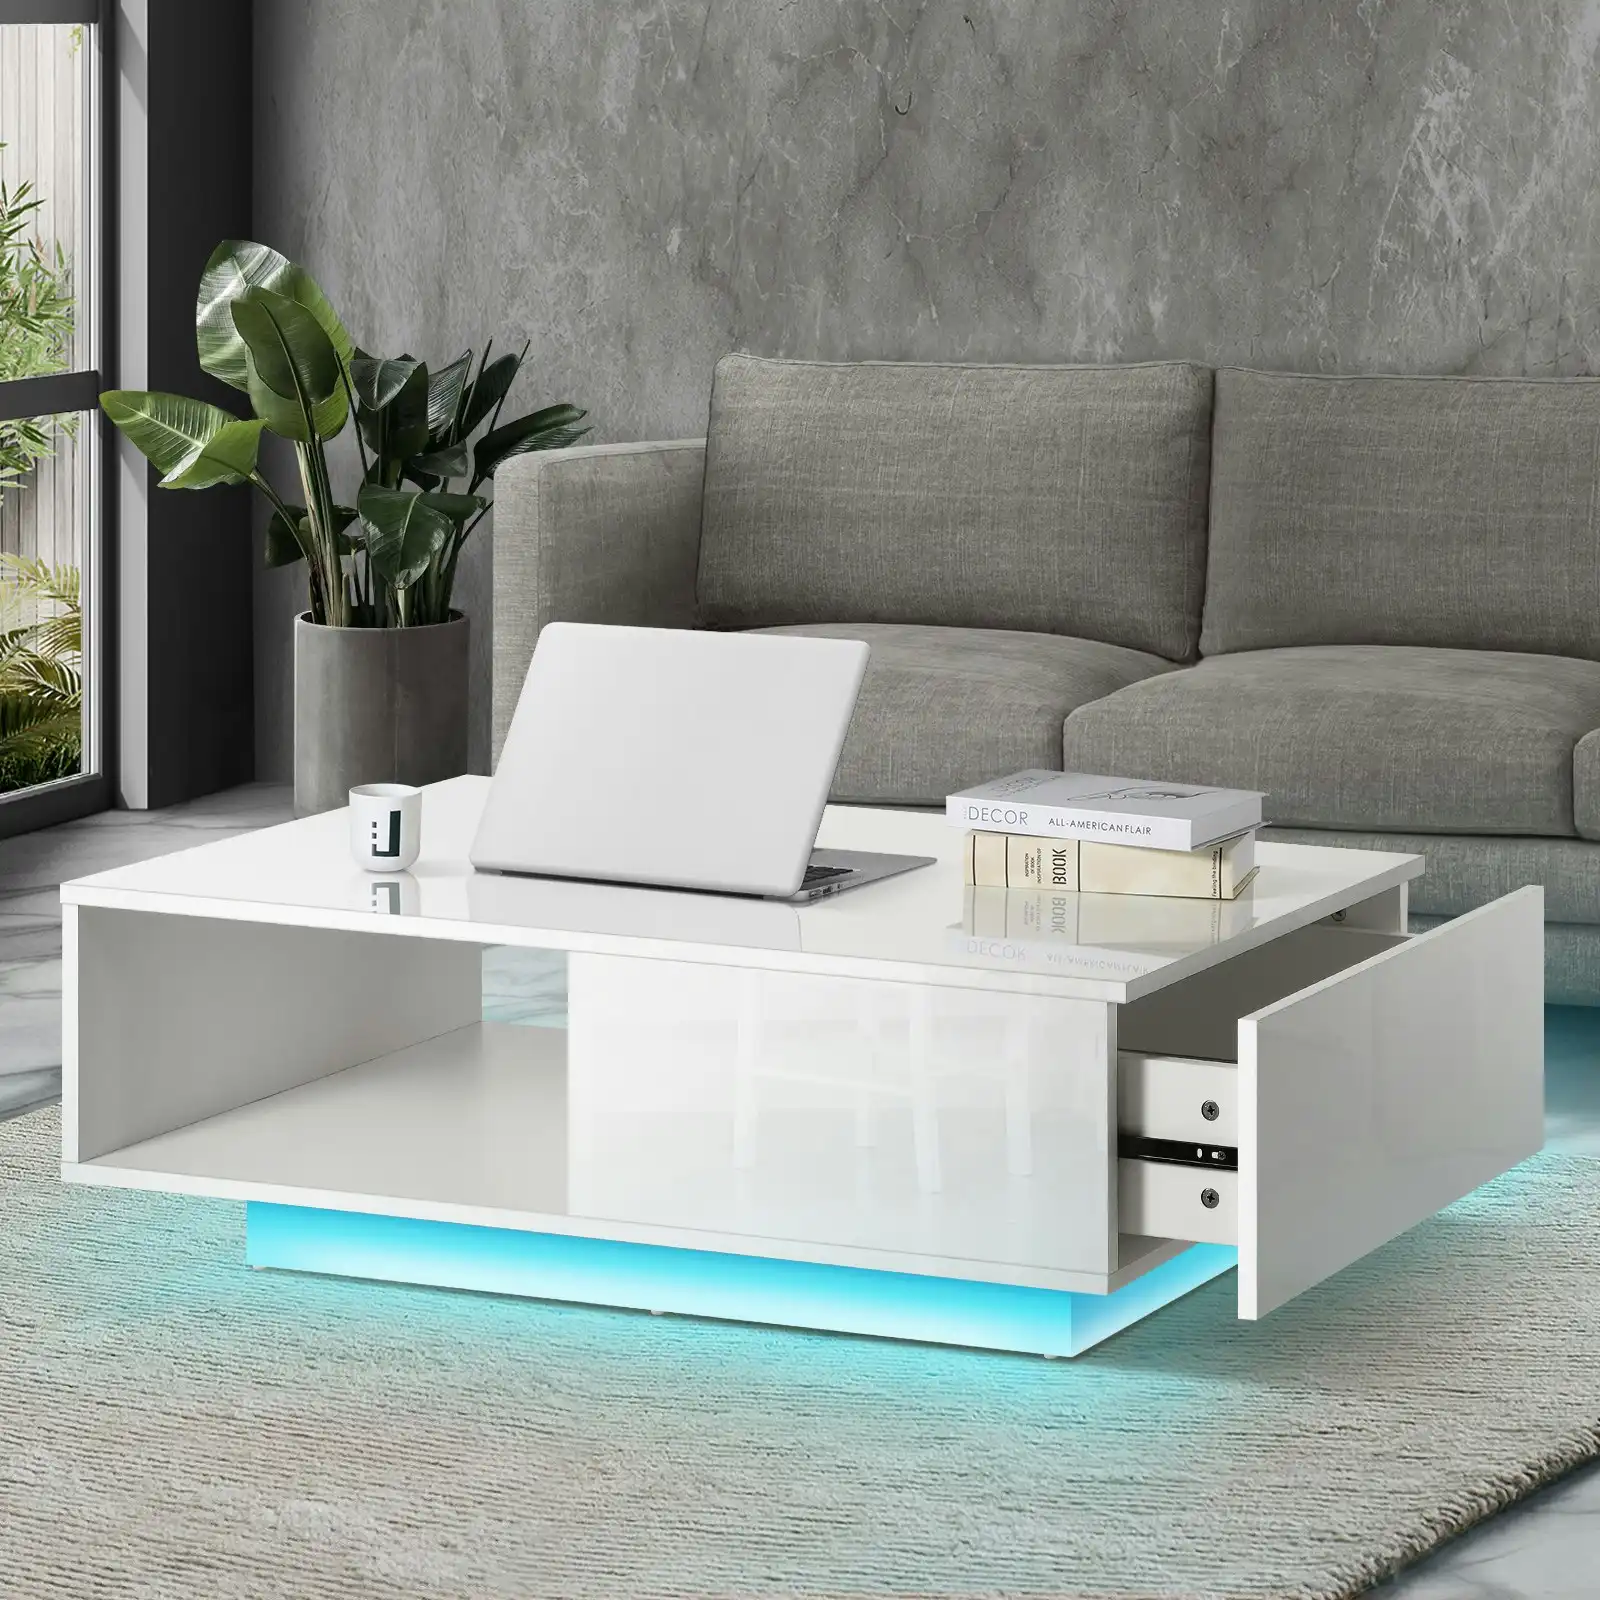 Oikiture Coffee Table LED Light High Gloss Storage Drawer Modern Furniture White